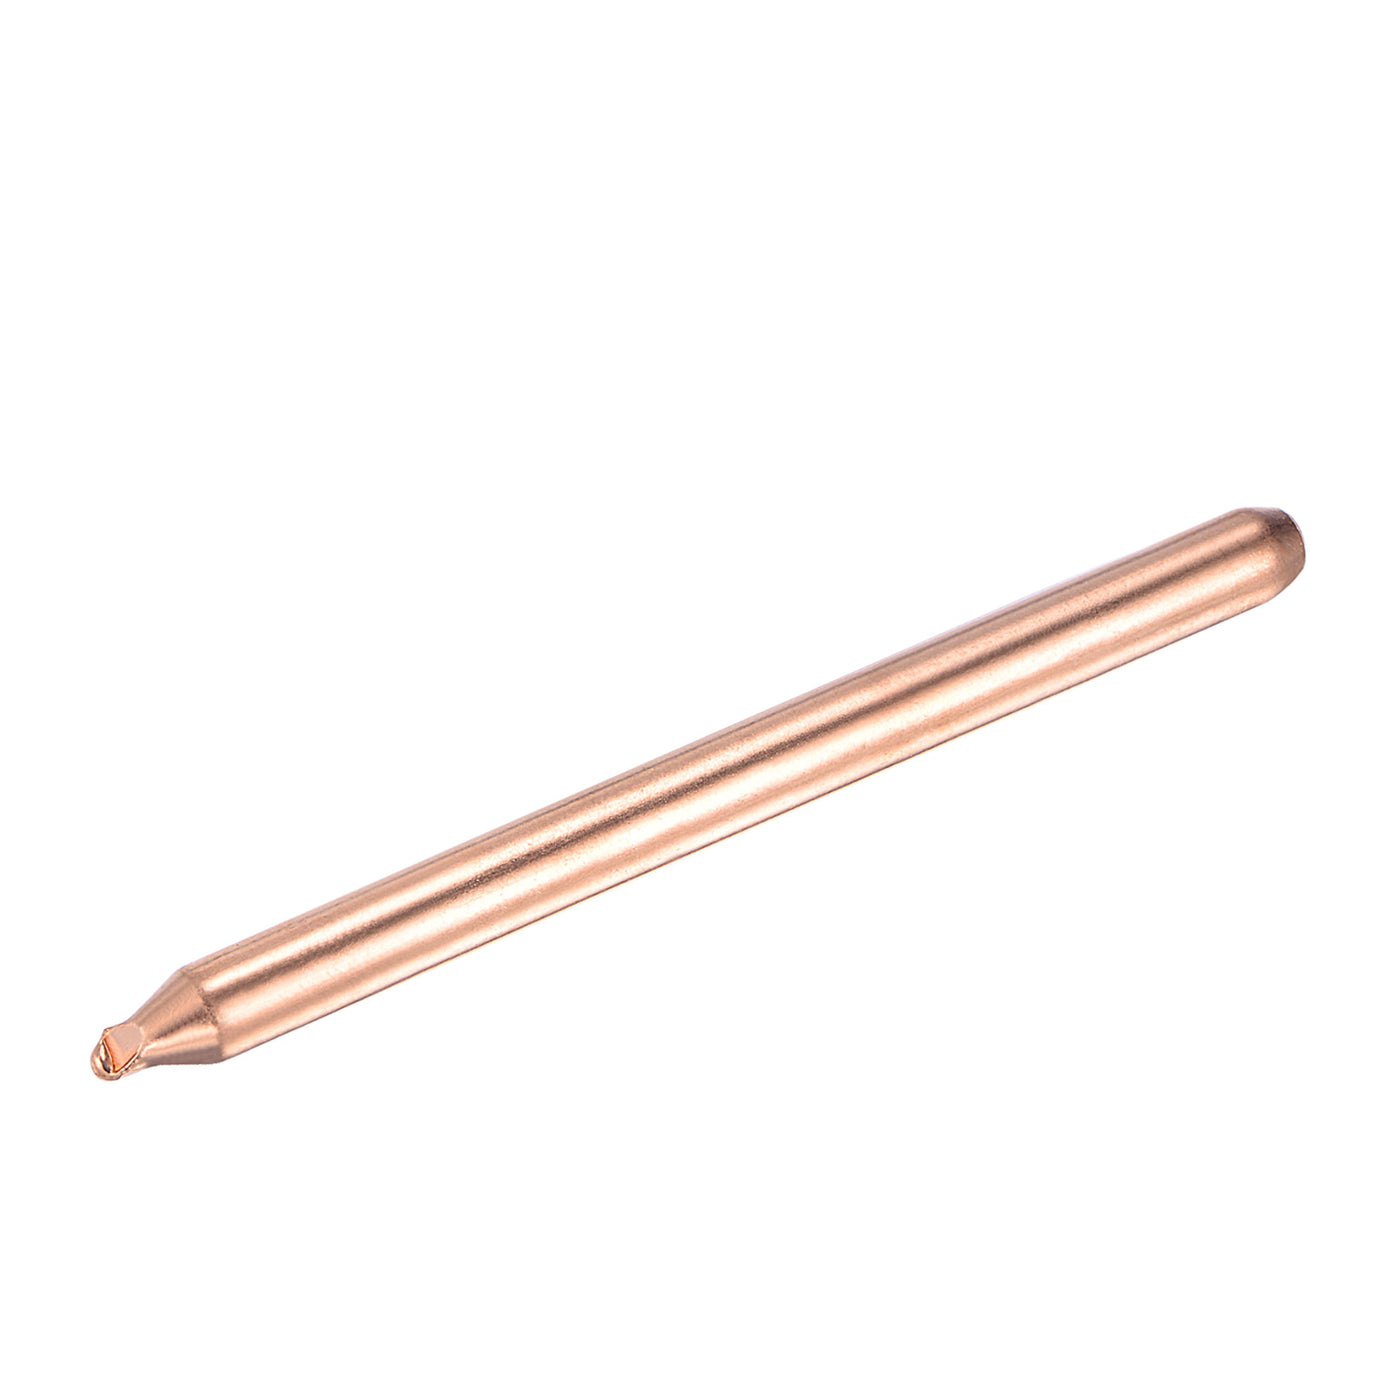 uxcell Uxcell Copper Round Heat Pipe for Cooling Laptop CPU GPU Heatsink 8mm x 60mm